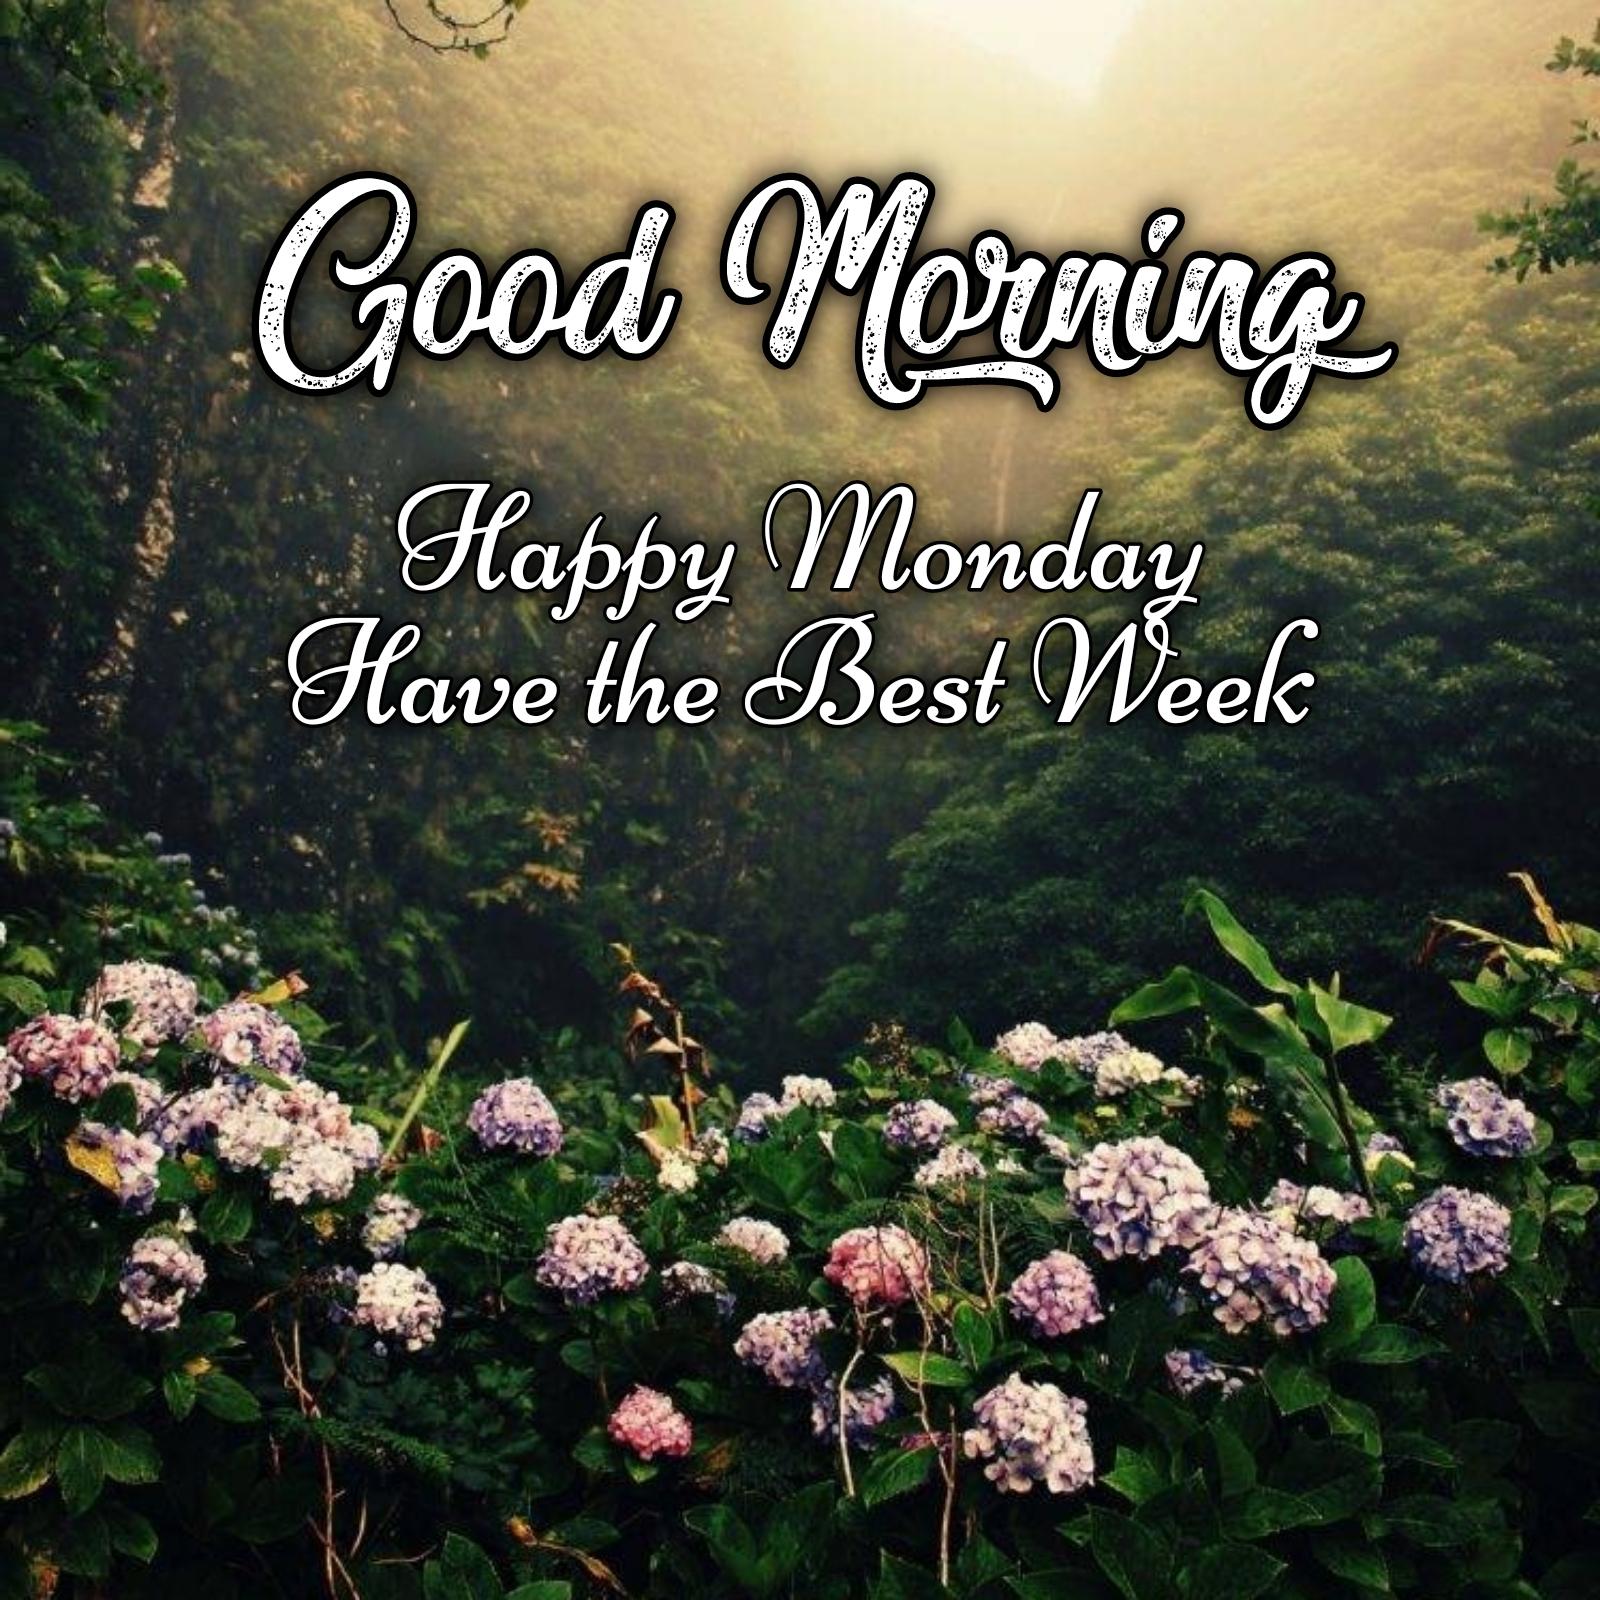 Good Morning Happy Monday Have the Best Week Images